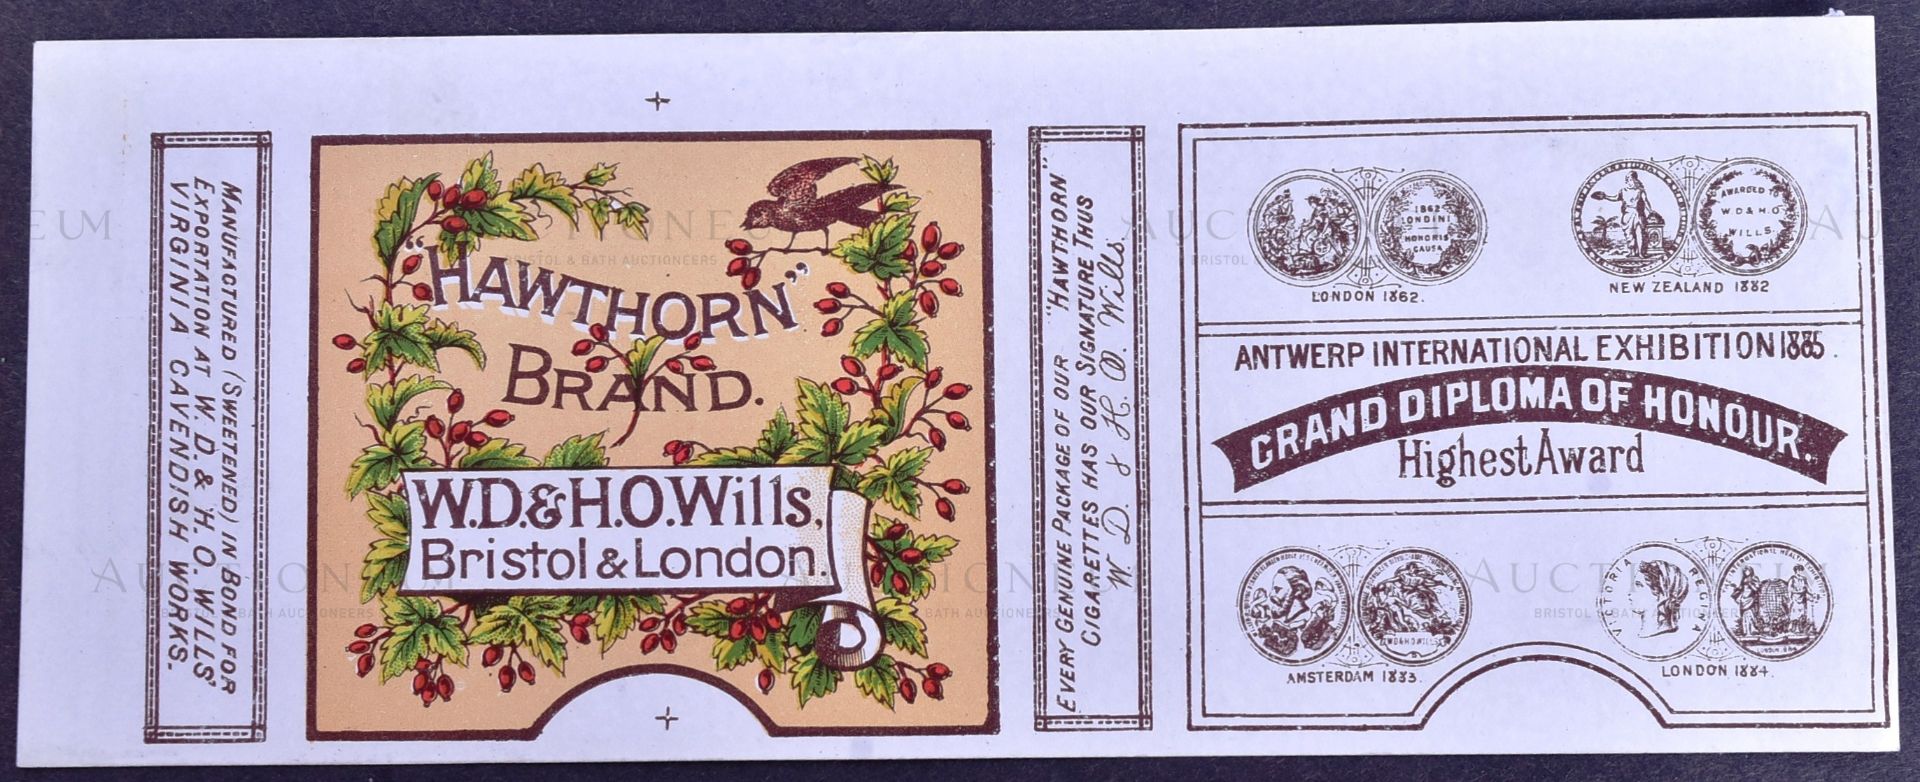 MARDON SON & HALL - CIGARETTE PACKETS - W.D. & H.O. WILLS - Image 6 of 7